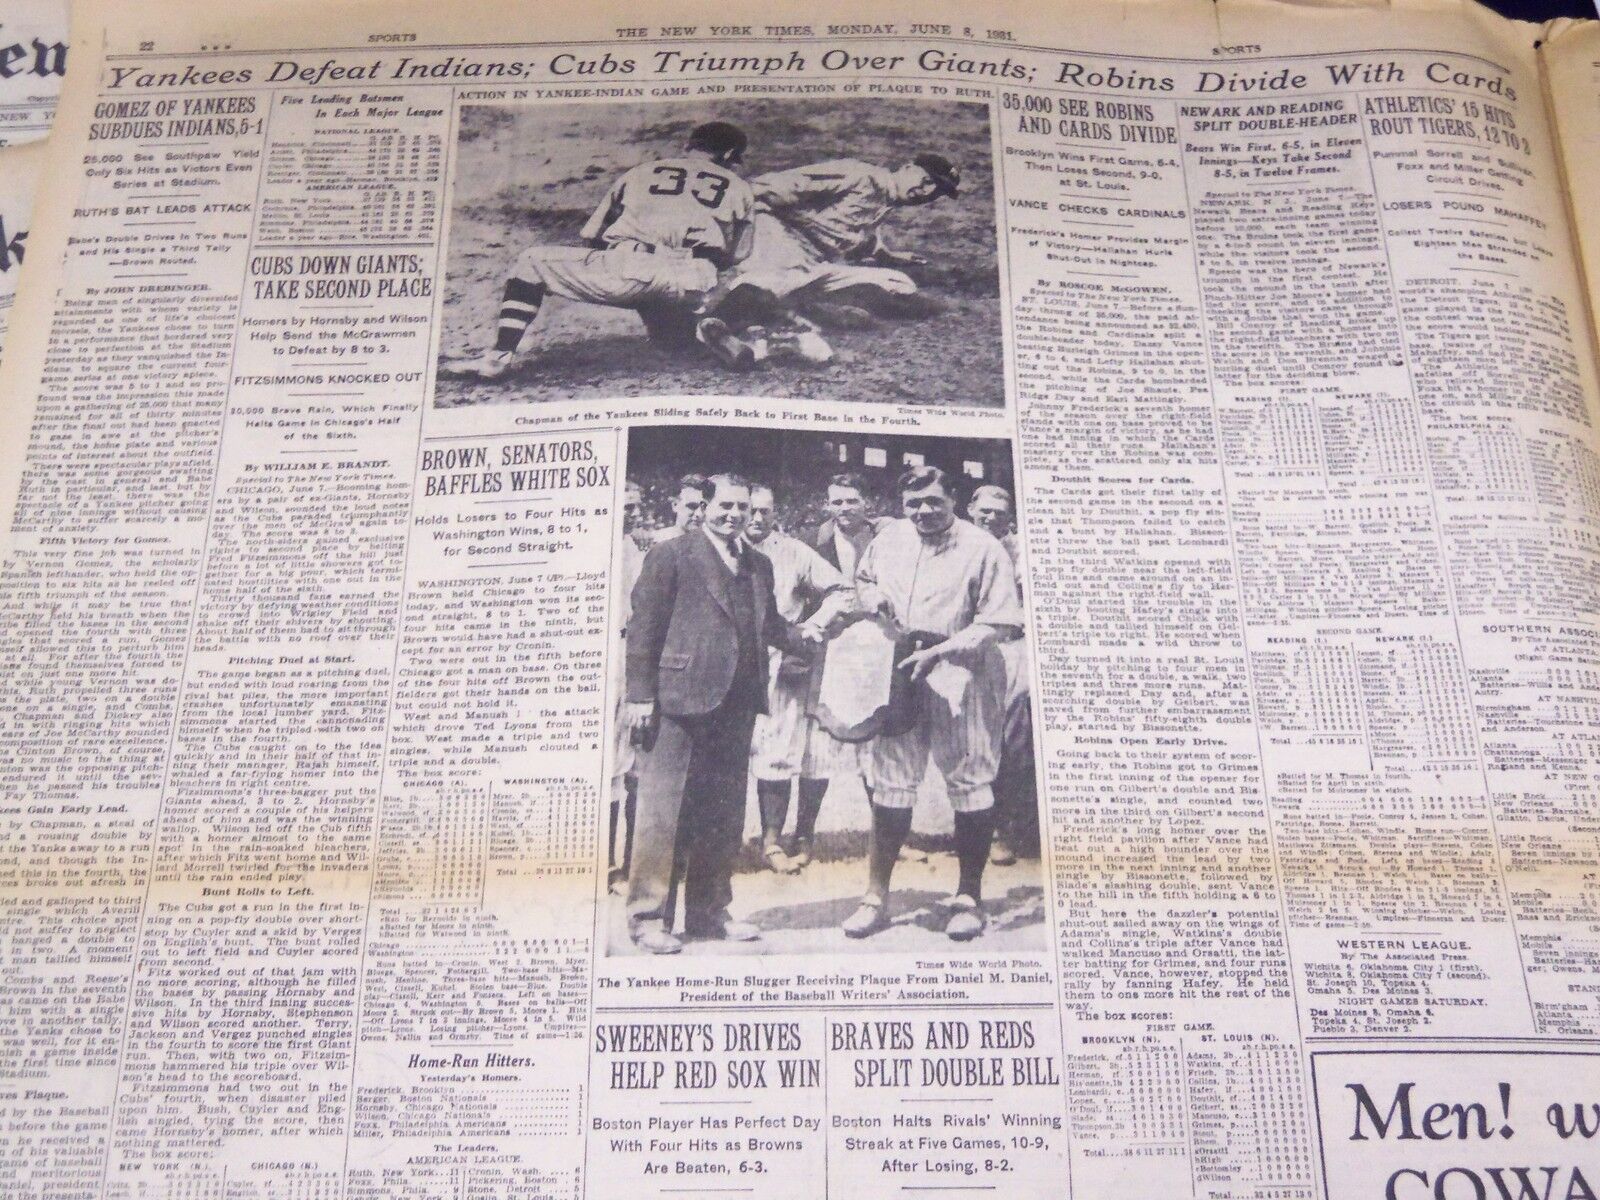 1931 JUNE 8 NEW YORK TIMES - BABE RUTH HONORED WITH PLAQUE - NT 2201